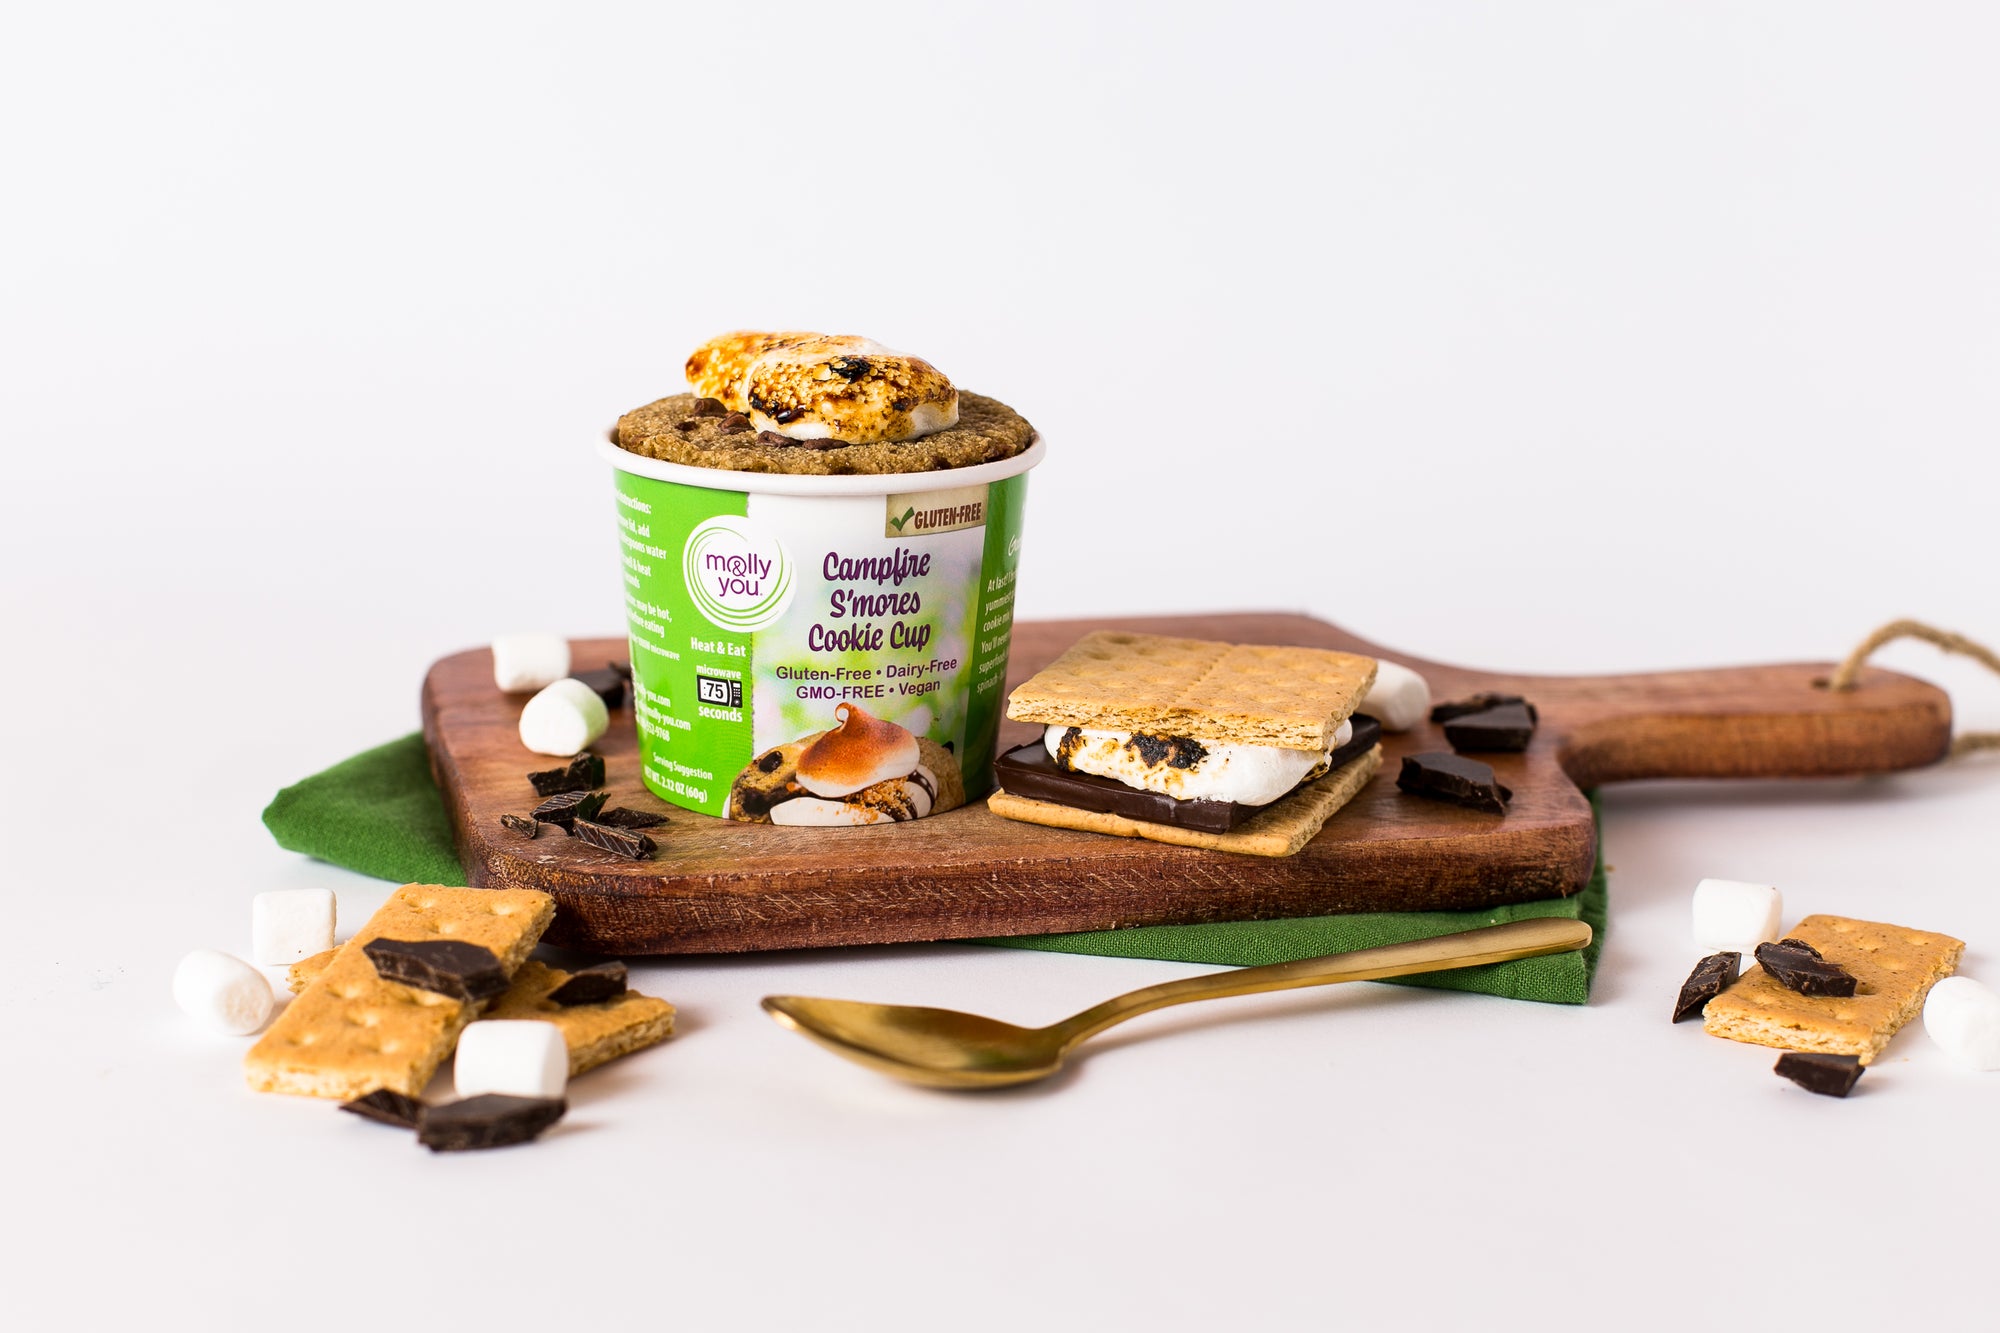 Gluten-Free Campfire S'mores Cookie Cup 3-Pack